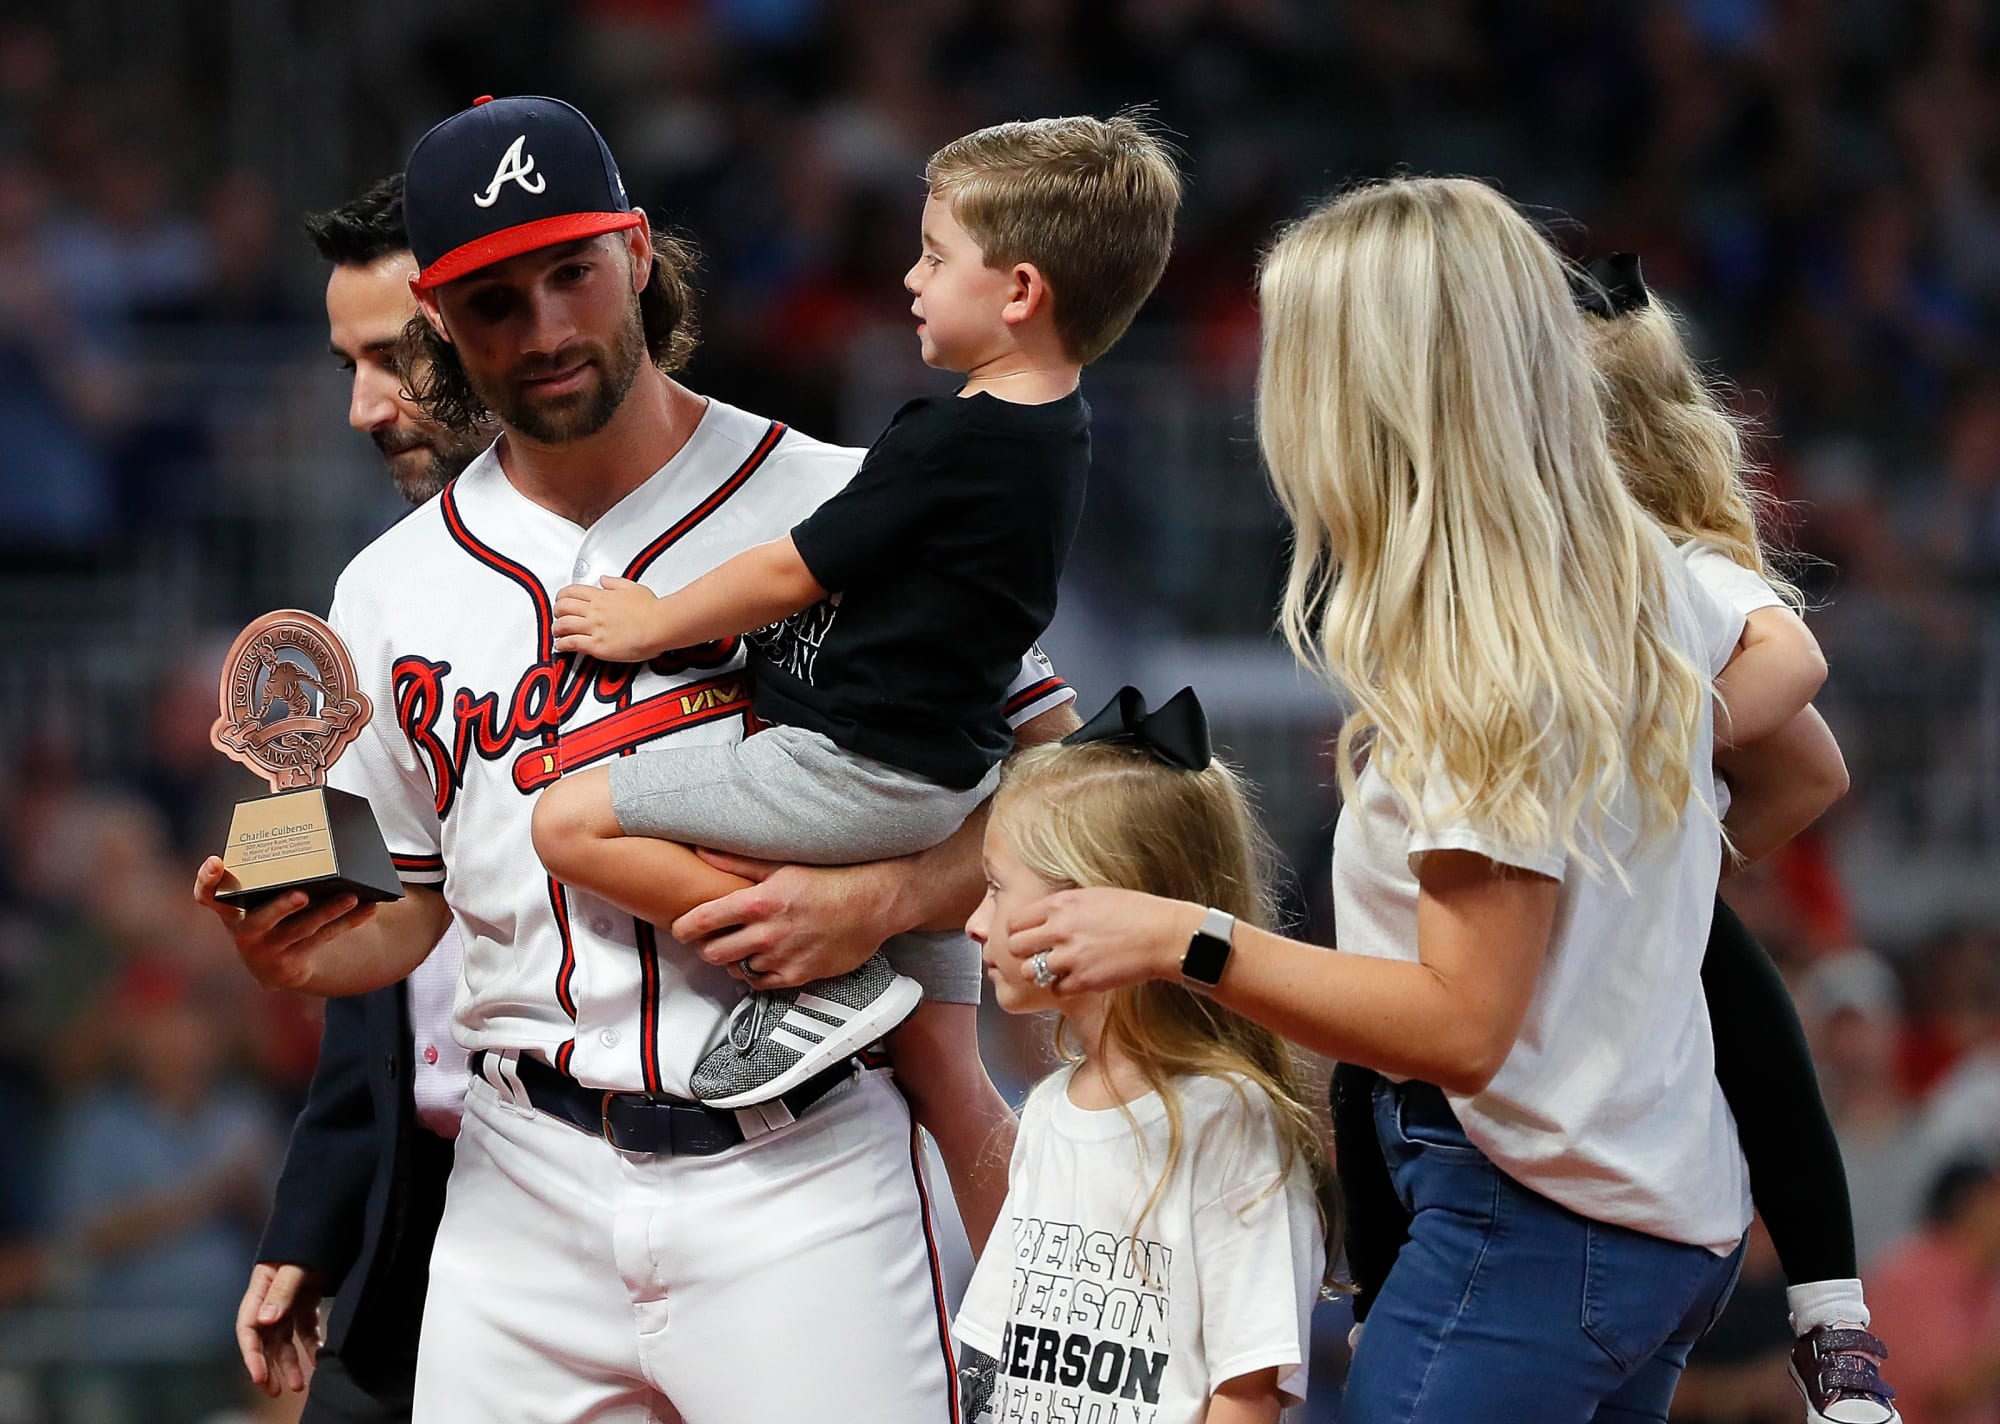 Are the Braves ready for Charlie Culberson's hair?